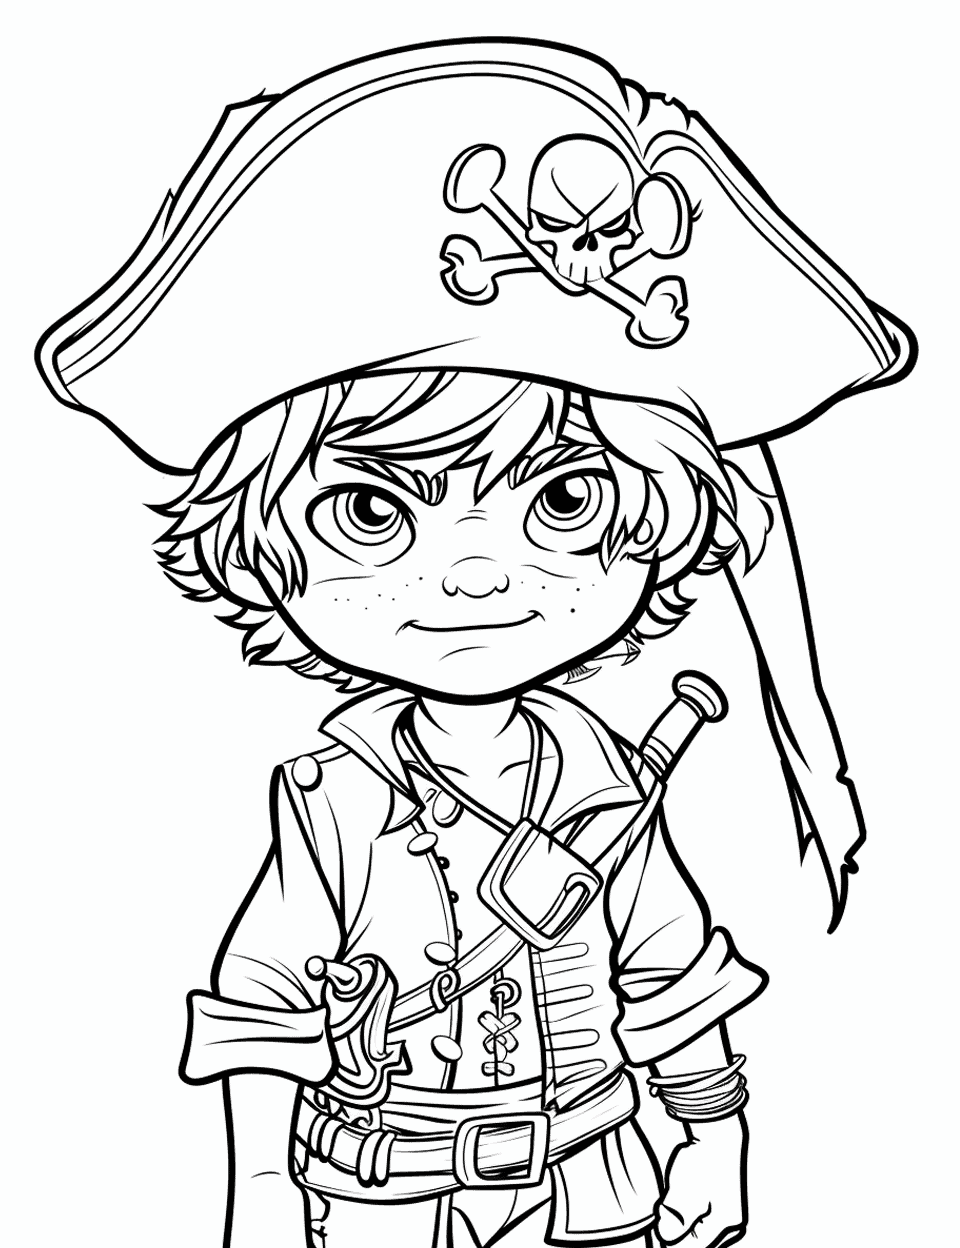 Pirate Kid’s First Voyage Coloring Page - A young boy dressed as a pirate ready for his first voyage.